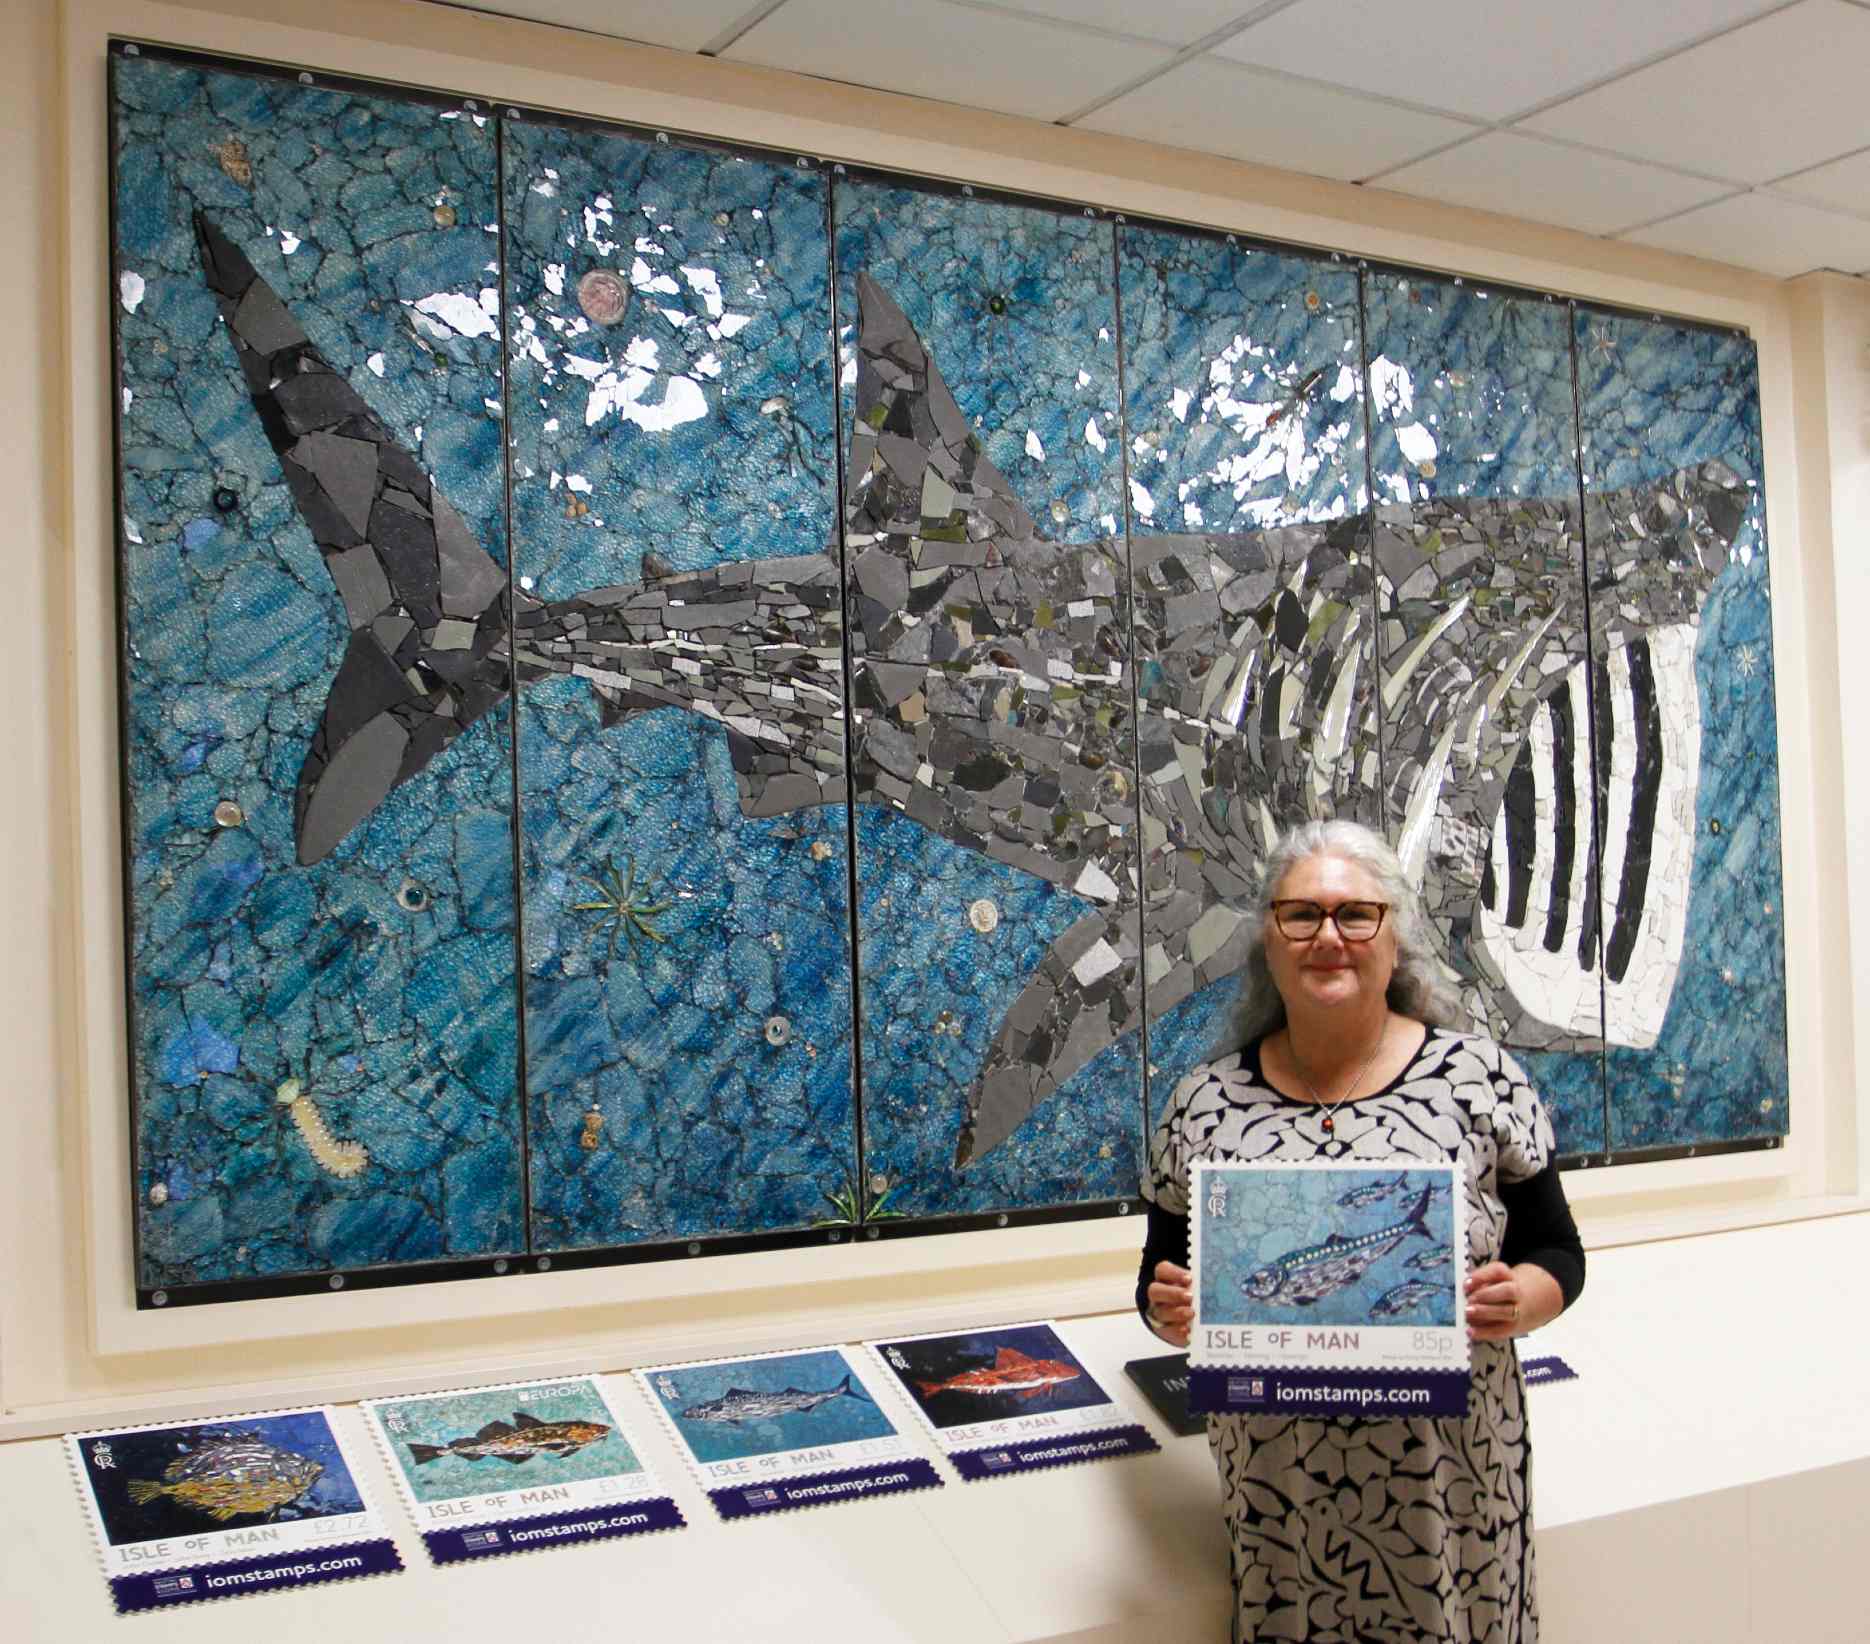 Kimmy McHarrie with the set of stamps and her new basking shark mural (IoM Post Office)